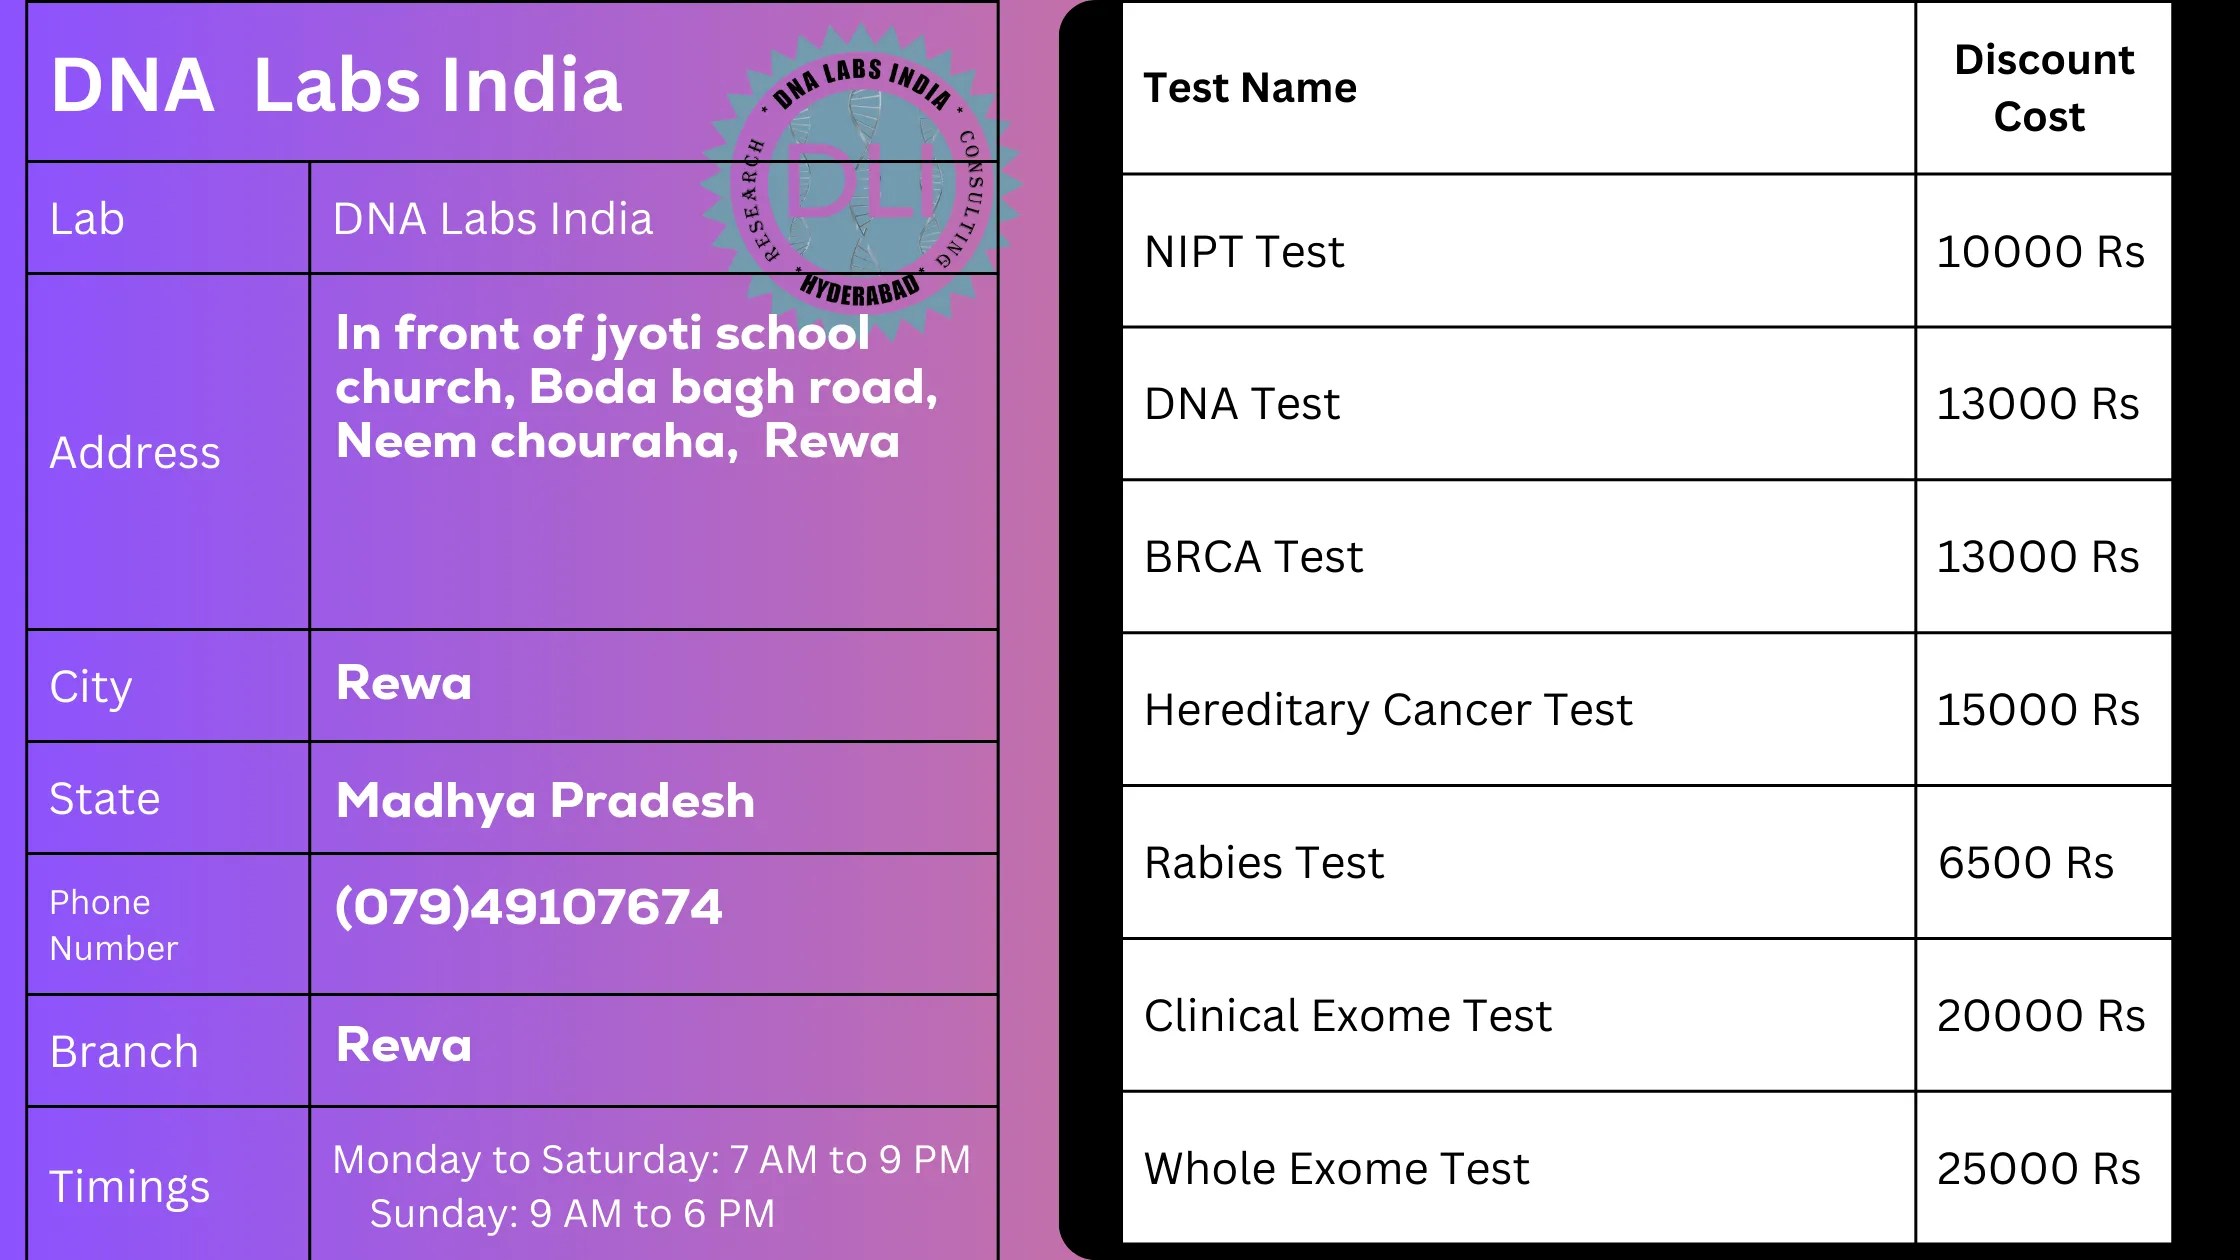 DNA Labs India in Rewa: Offering Accurate and Reliable Genetic Tests